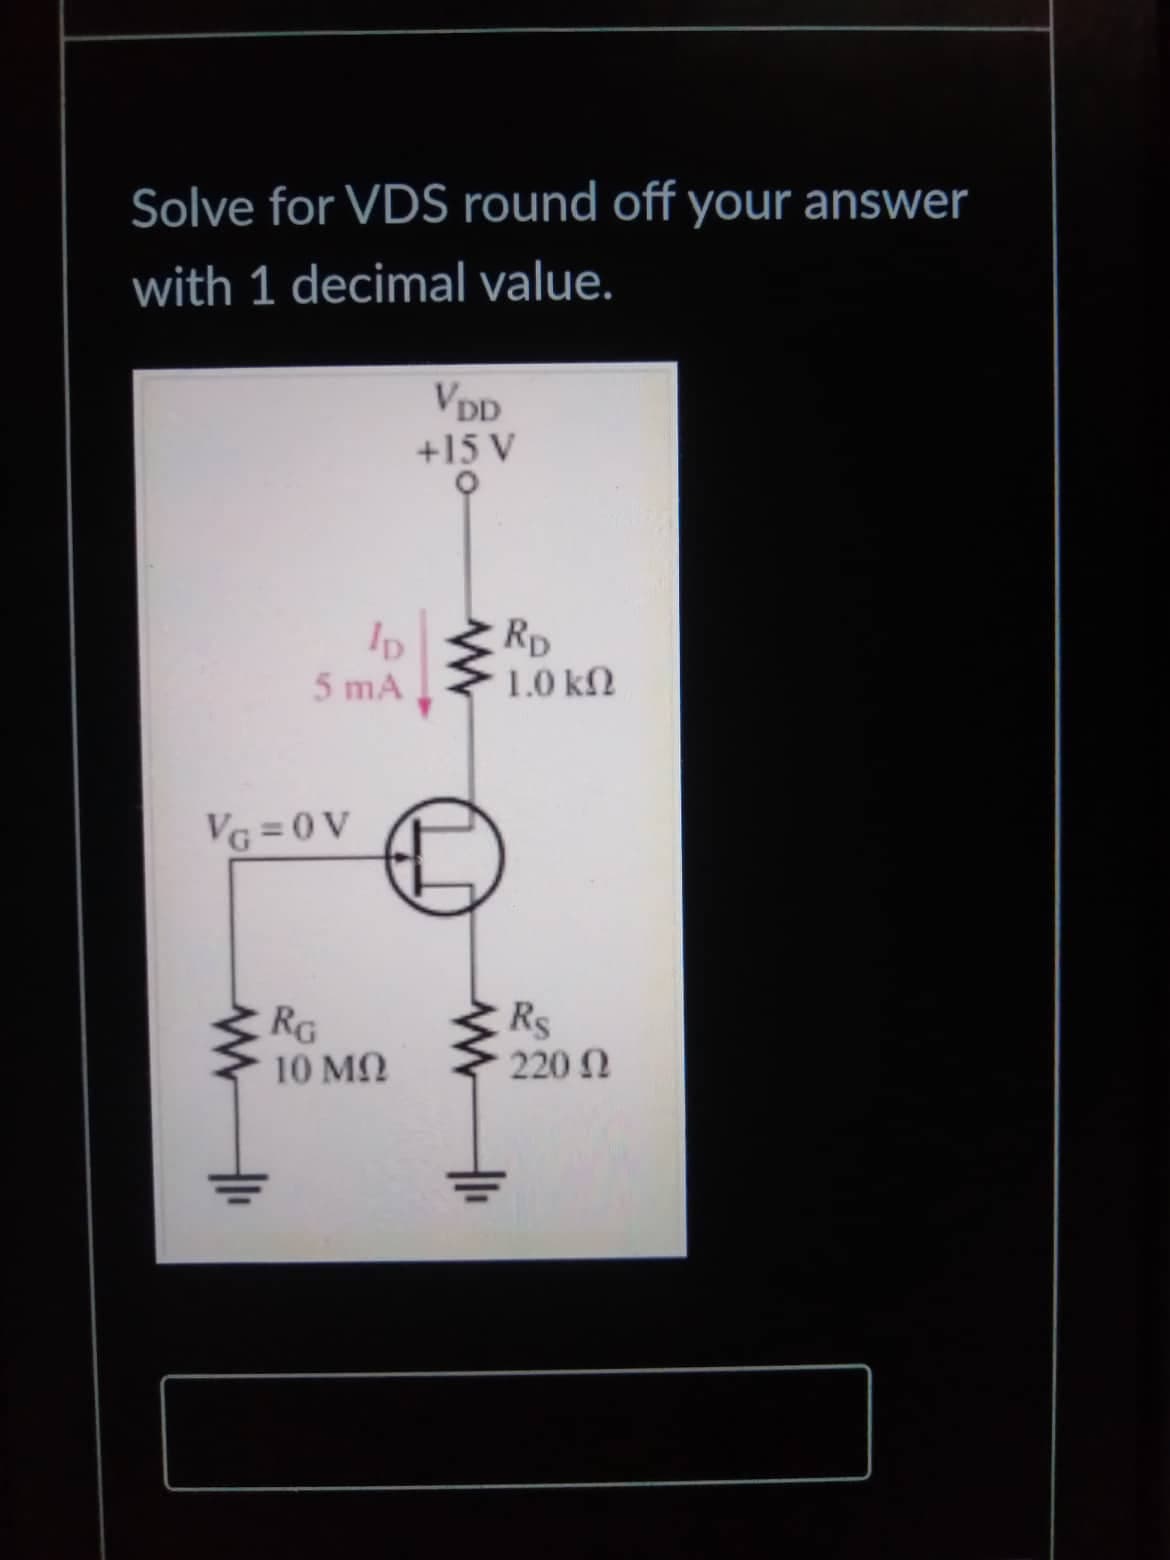 Solve for VDS round off your answer
with 1 decimal value.
lp
5 mA
VG=0V
RG
10 ΜΩ
VDD
+15 V
www
RD
1.0 ΚΩ
Rs
220 Ω